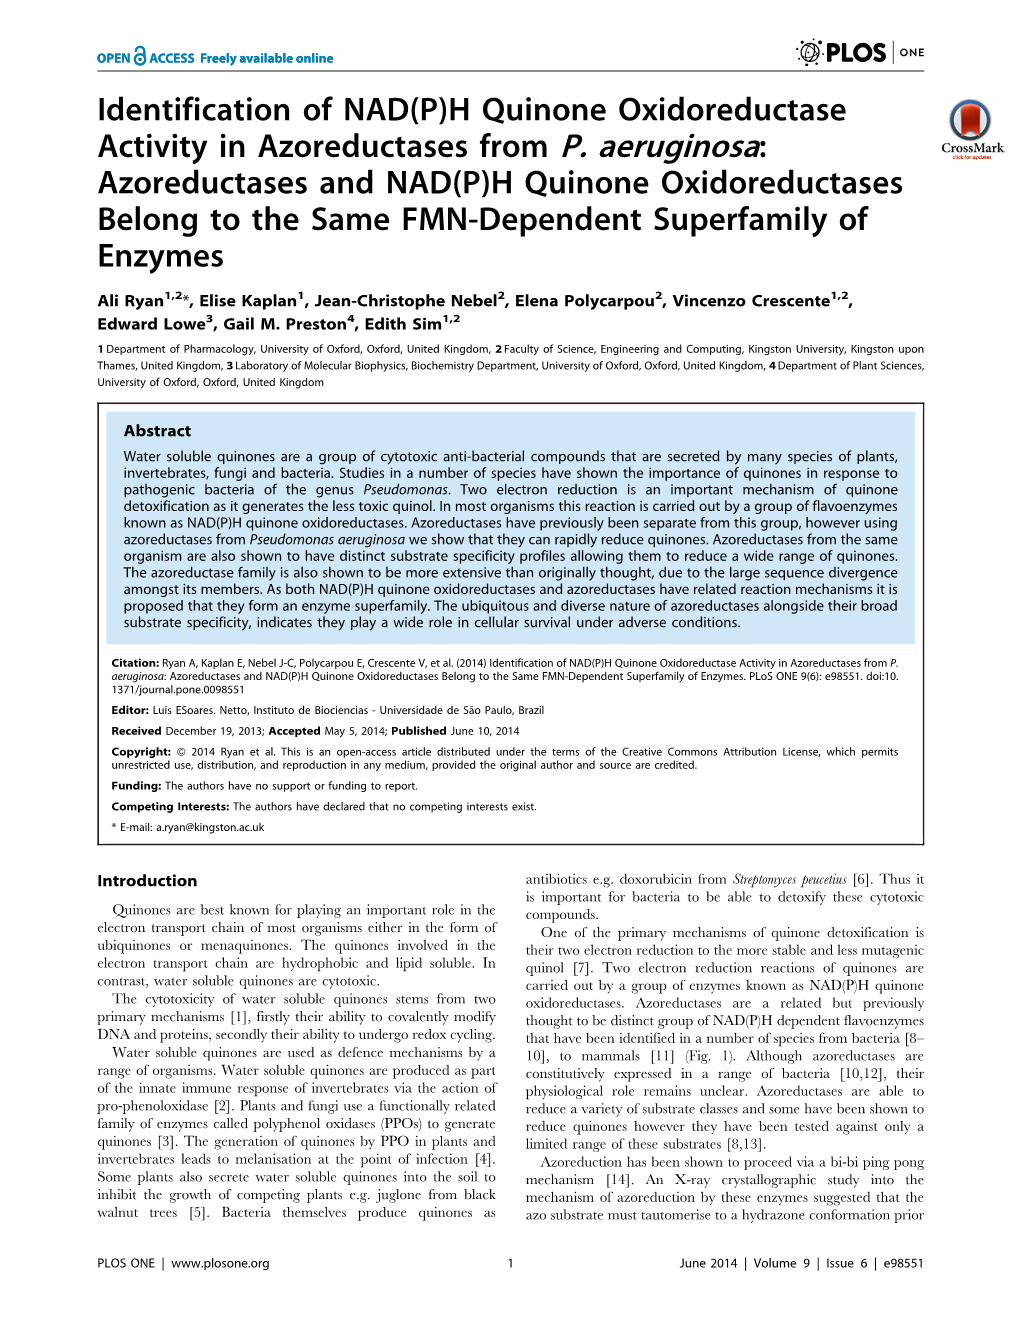 Identification of NAD (P) H Quinone Oxidoreductase Activity In